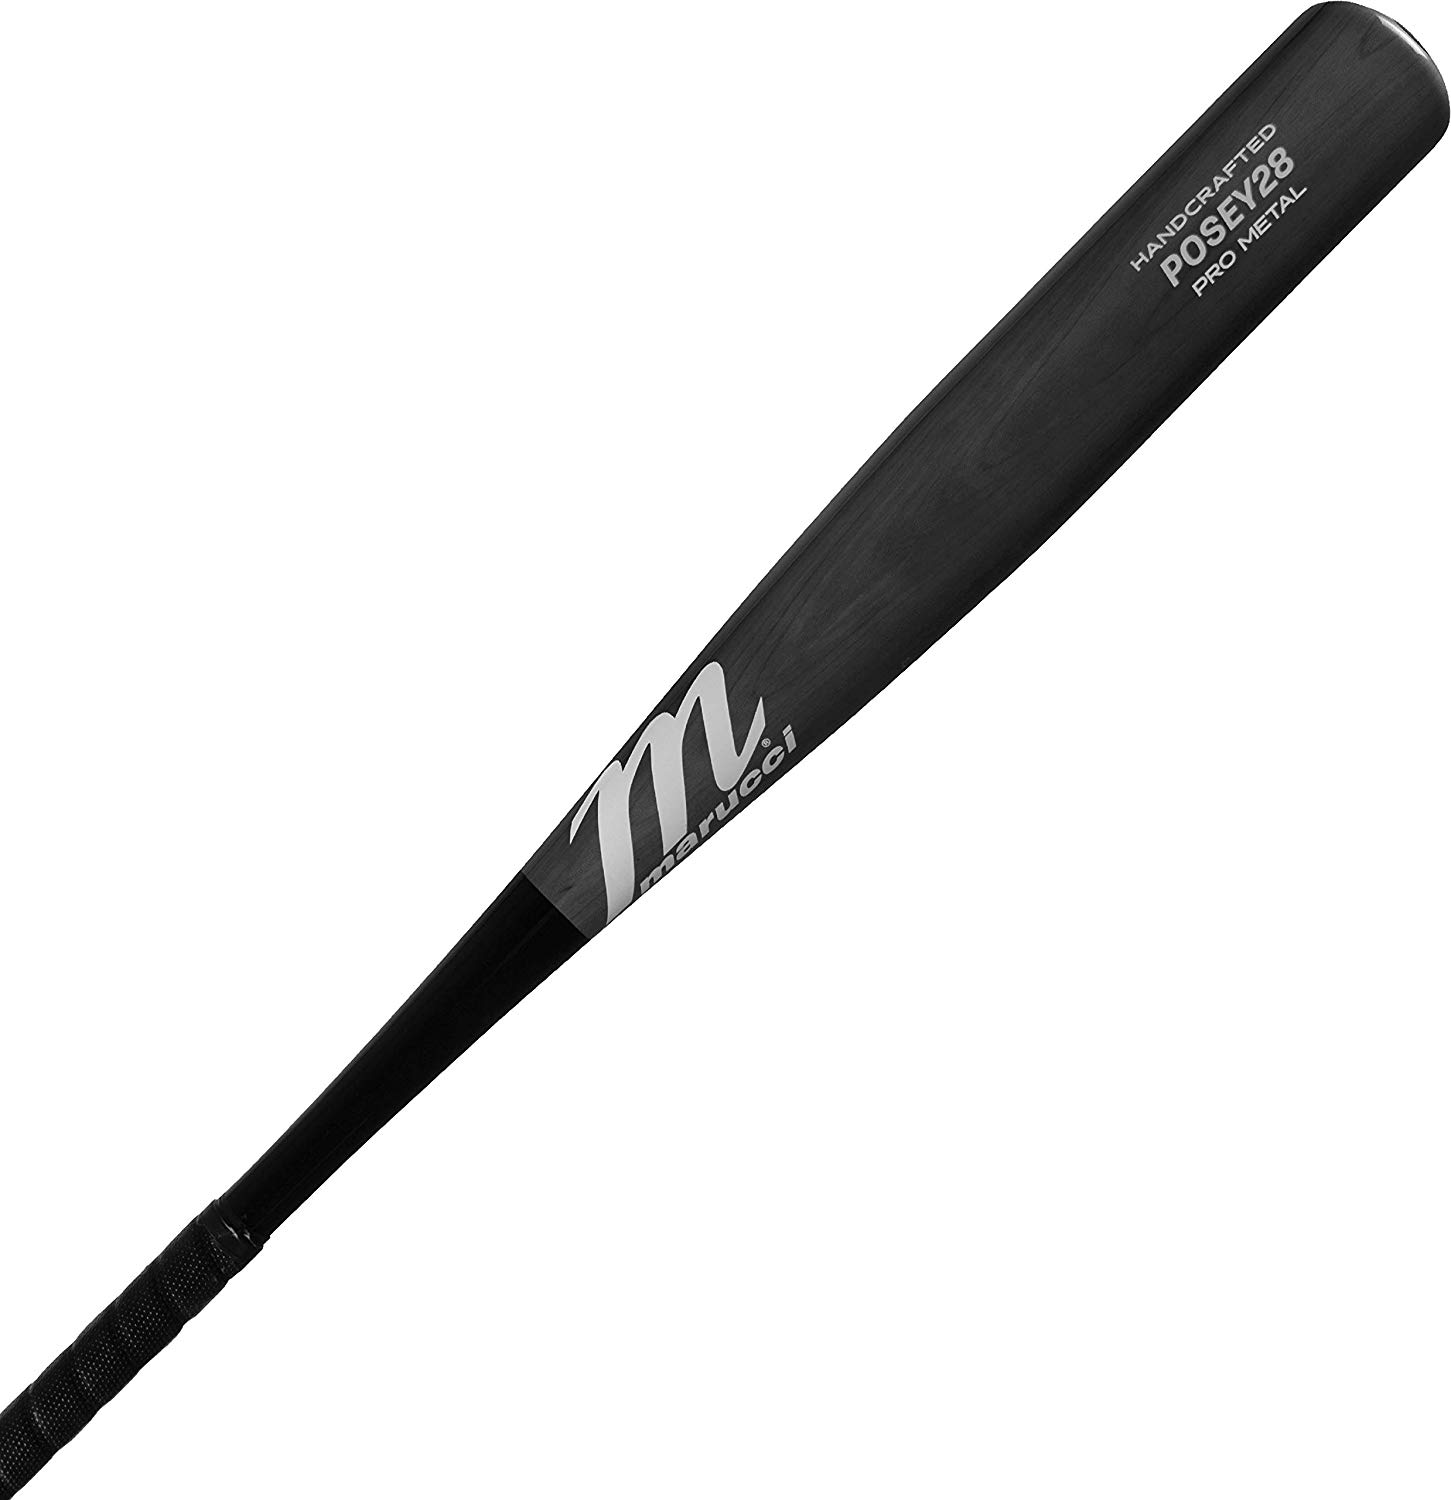 AZ105 alloy, the strongest aluminum on the Marucci bat line, allows for thinner barrel walls, a higher response rate and better durability Multi-variable wall design creates an expanded sweet spot and thinner barrel walls that are more forgiving after off-centered contact 6th Generation AV2 Anti-Vibration knob features an upgraded, finely tuned harmonic dampening system for better feel and less negative vibrational feedback Ring-free barrel construction allows for more barrel flex and increases performance with no dead spots Precision-balanced barrel results in a lower M. O. I. and balanced feel for precision and control. he POSEY28 Pro Metal baseball bat combines all the pop of the high-strength AZ105 alloy with the look of Marucci partner Buster Posey’s in-game model. The smoke-colored wood grain cosmetics are the only thing “wood” about this one-piece alloy masher which delivers explosive performance with an extended barrel and more responsive sweet spot. AZ105 alloy, the strongest aluminum on the Marucci bat line, allows for thinner barrel walls, a higher response rate and better durability Multi-variable wall design creates an expanded sweet spot and thinner barrel walls that are more forgiving after off-centered contact 2nd Generation AV2 Anti-Vibration knob features an upgraded, finely tuned harmonic dampening system for better feel and less negative vibrational feedback Ring-free barrel construction allows for more barrel flex and increases performance with no dead spots Precision-balanced barrel results in a lower M.O.I. and balanced feel for precision and control One-piece alloy construction provides a clean, consistent, traditional swing Professionally inspired handle features a removable taper and an ergonomic knob shape for more top-hand control and comfort Micro-perforated soft-touch grip with extra tack improves feel and control The POSEY28 Pro Metal comes standard with a black 1.75mm grip Grip weight and manufacturing tolerances may cause slight deviation from the listed weight 2 5/8 barrel BBCOR certified One-year warranty included